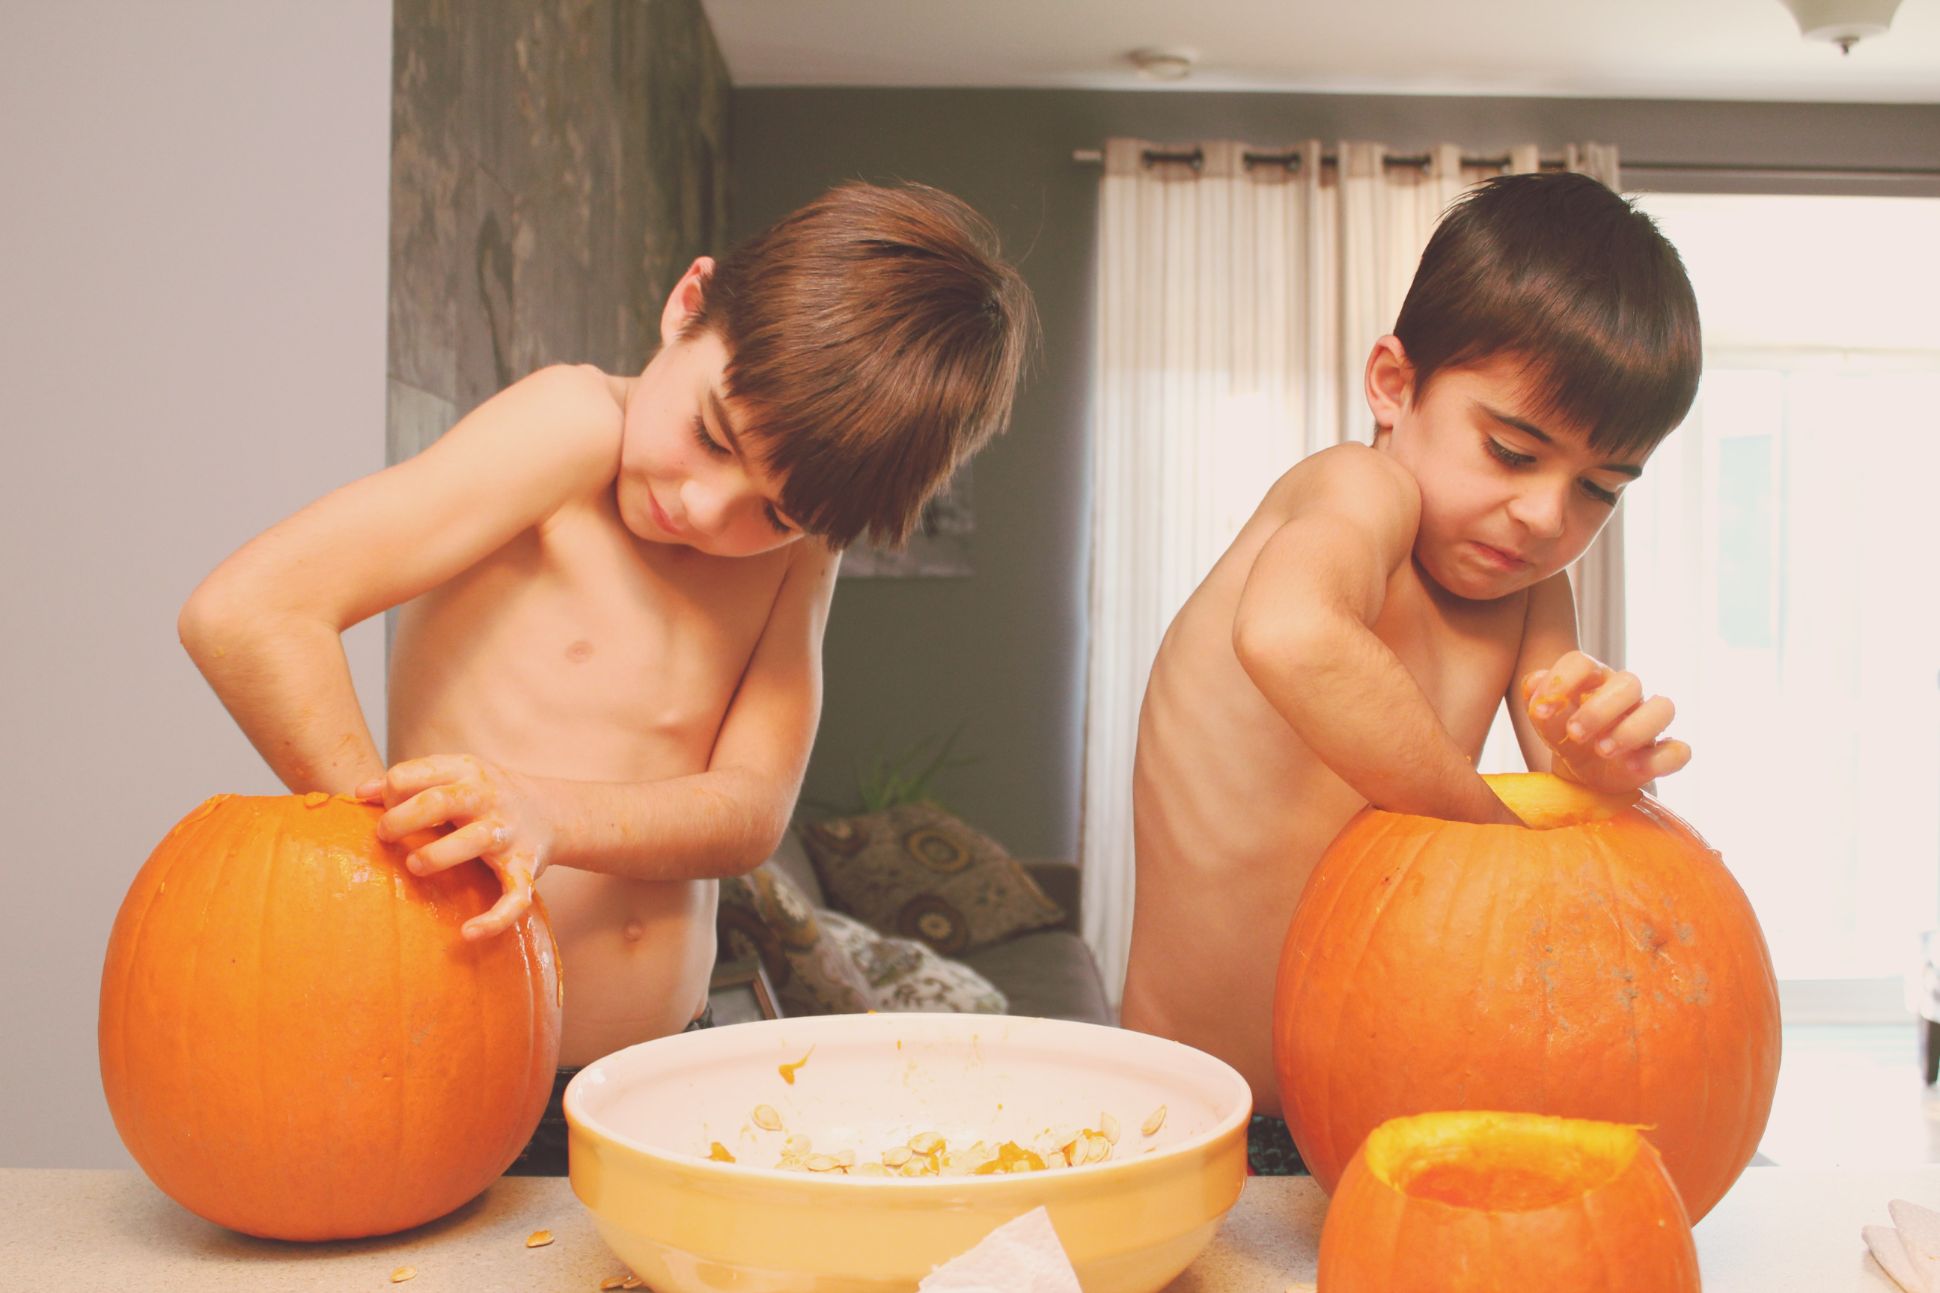 Two boys hollowing out pumpkins